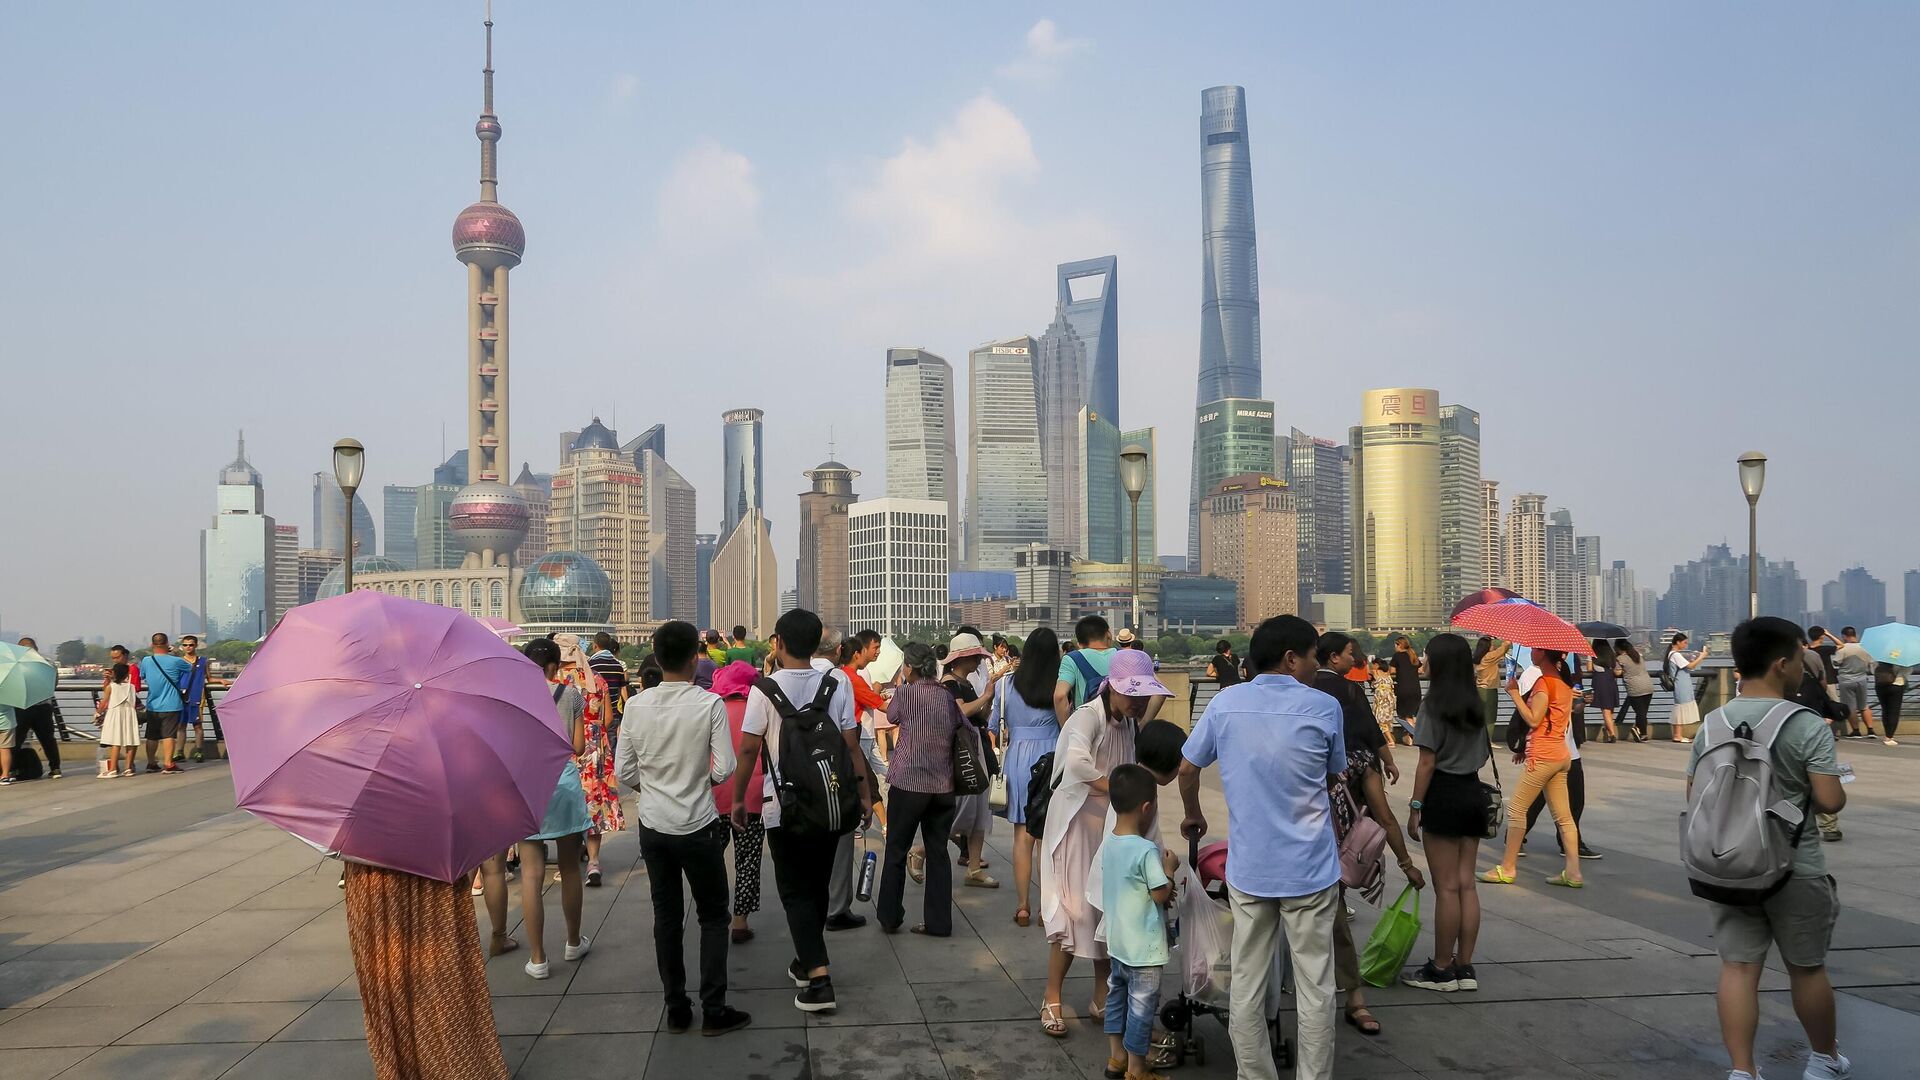 People walk on the waterfront bund in Shanghai on July 21, 2017. - Shanghai sweltered under a new record high of 40.9 degrees Centigrade (105 F) on July 21, authorities said as they issued a weather red alert over a stubborn heat wave that has plagued much of the country. - Sputnik International, 1920, 20.08.2022